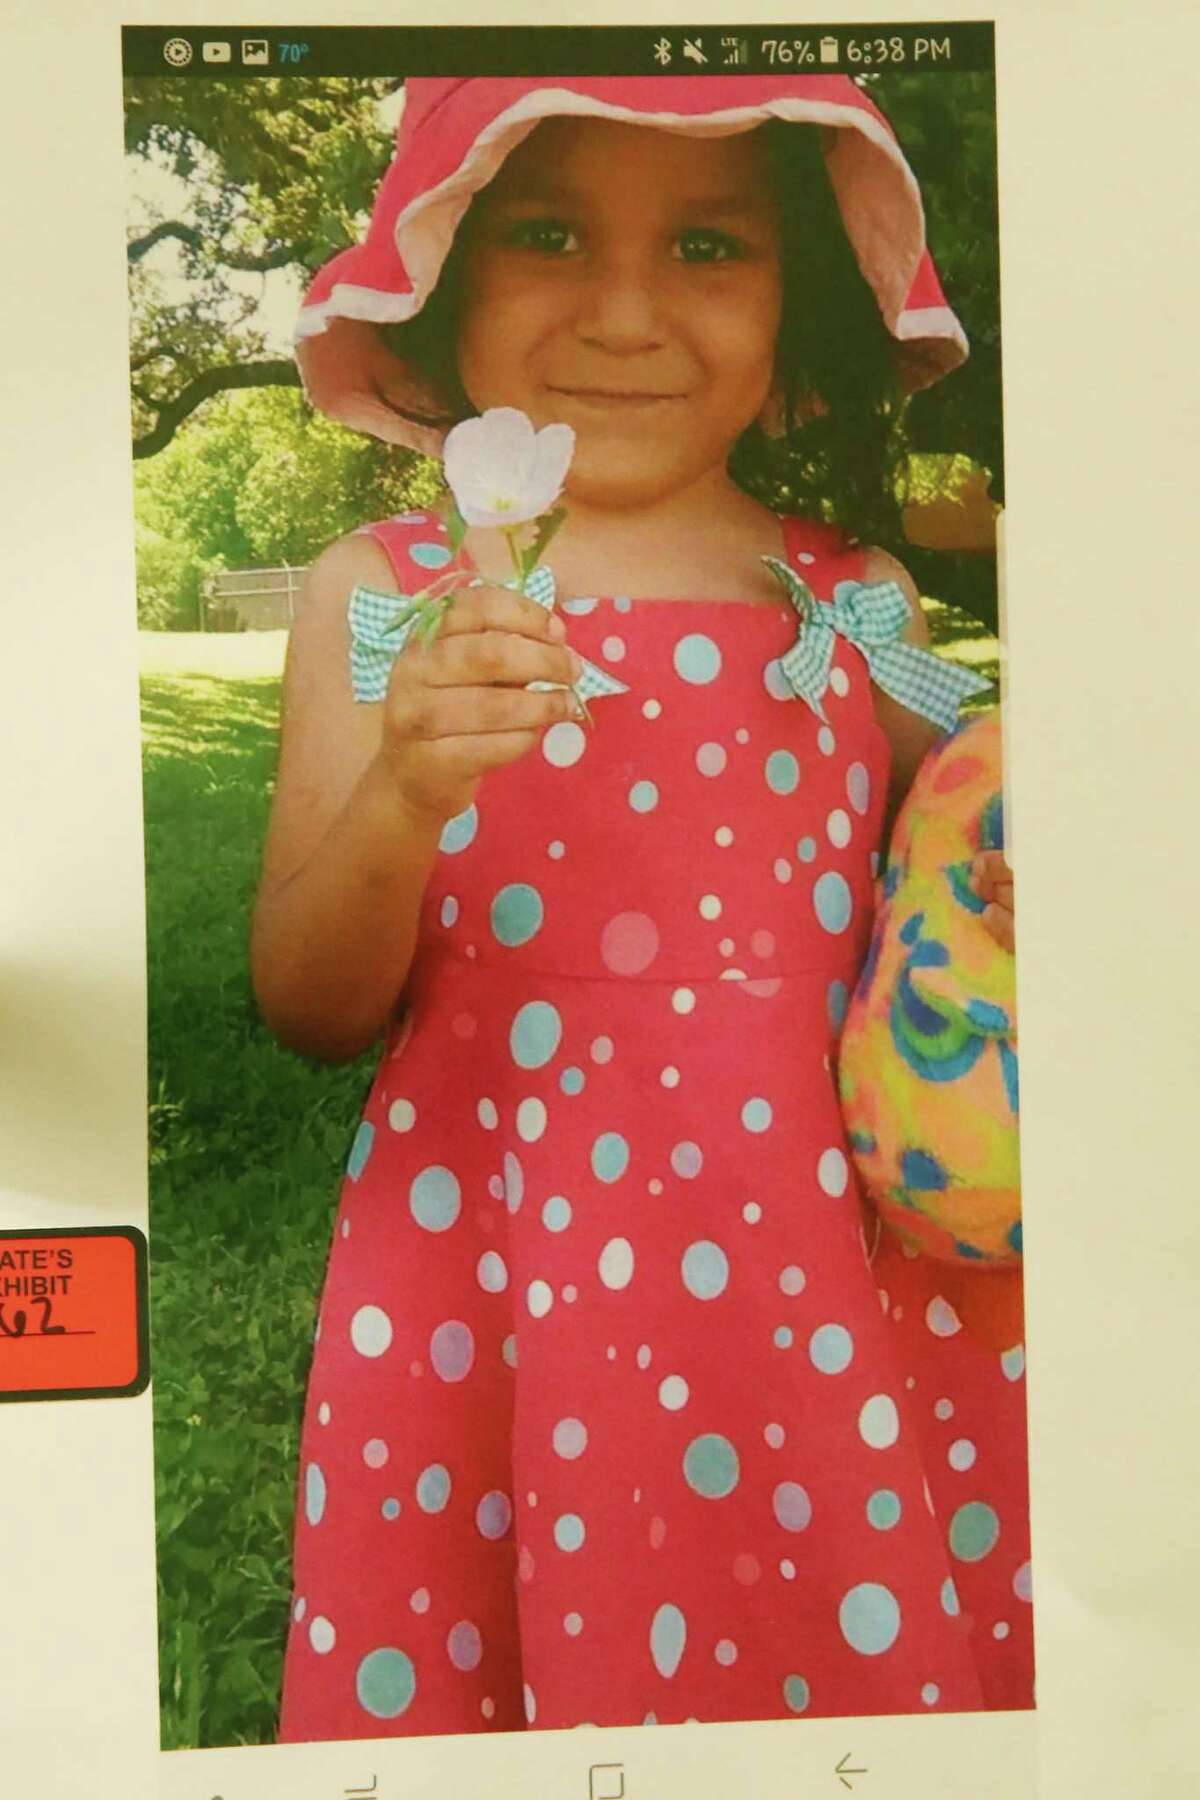 A photo of Olivia Briones is shown during the murder trial of her mother, Jessica Briones, on Friday. The mother is accused of killing Olivia, 4, in 2017.